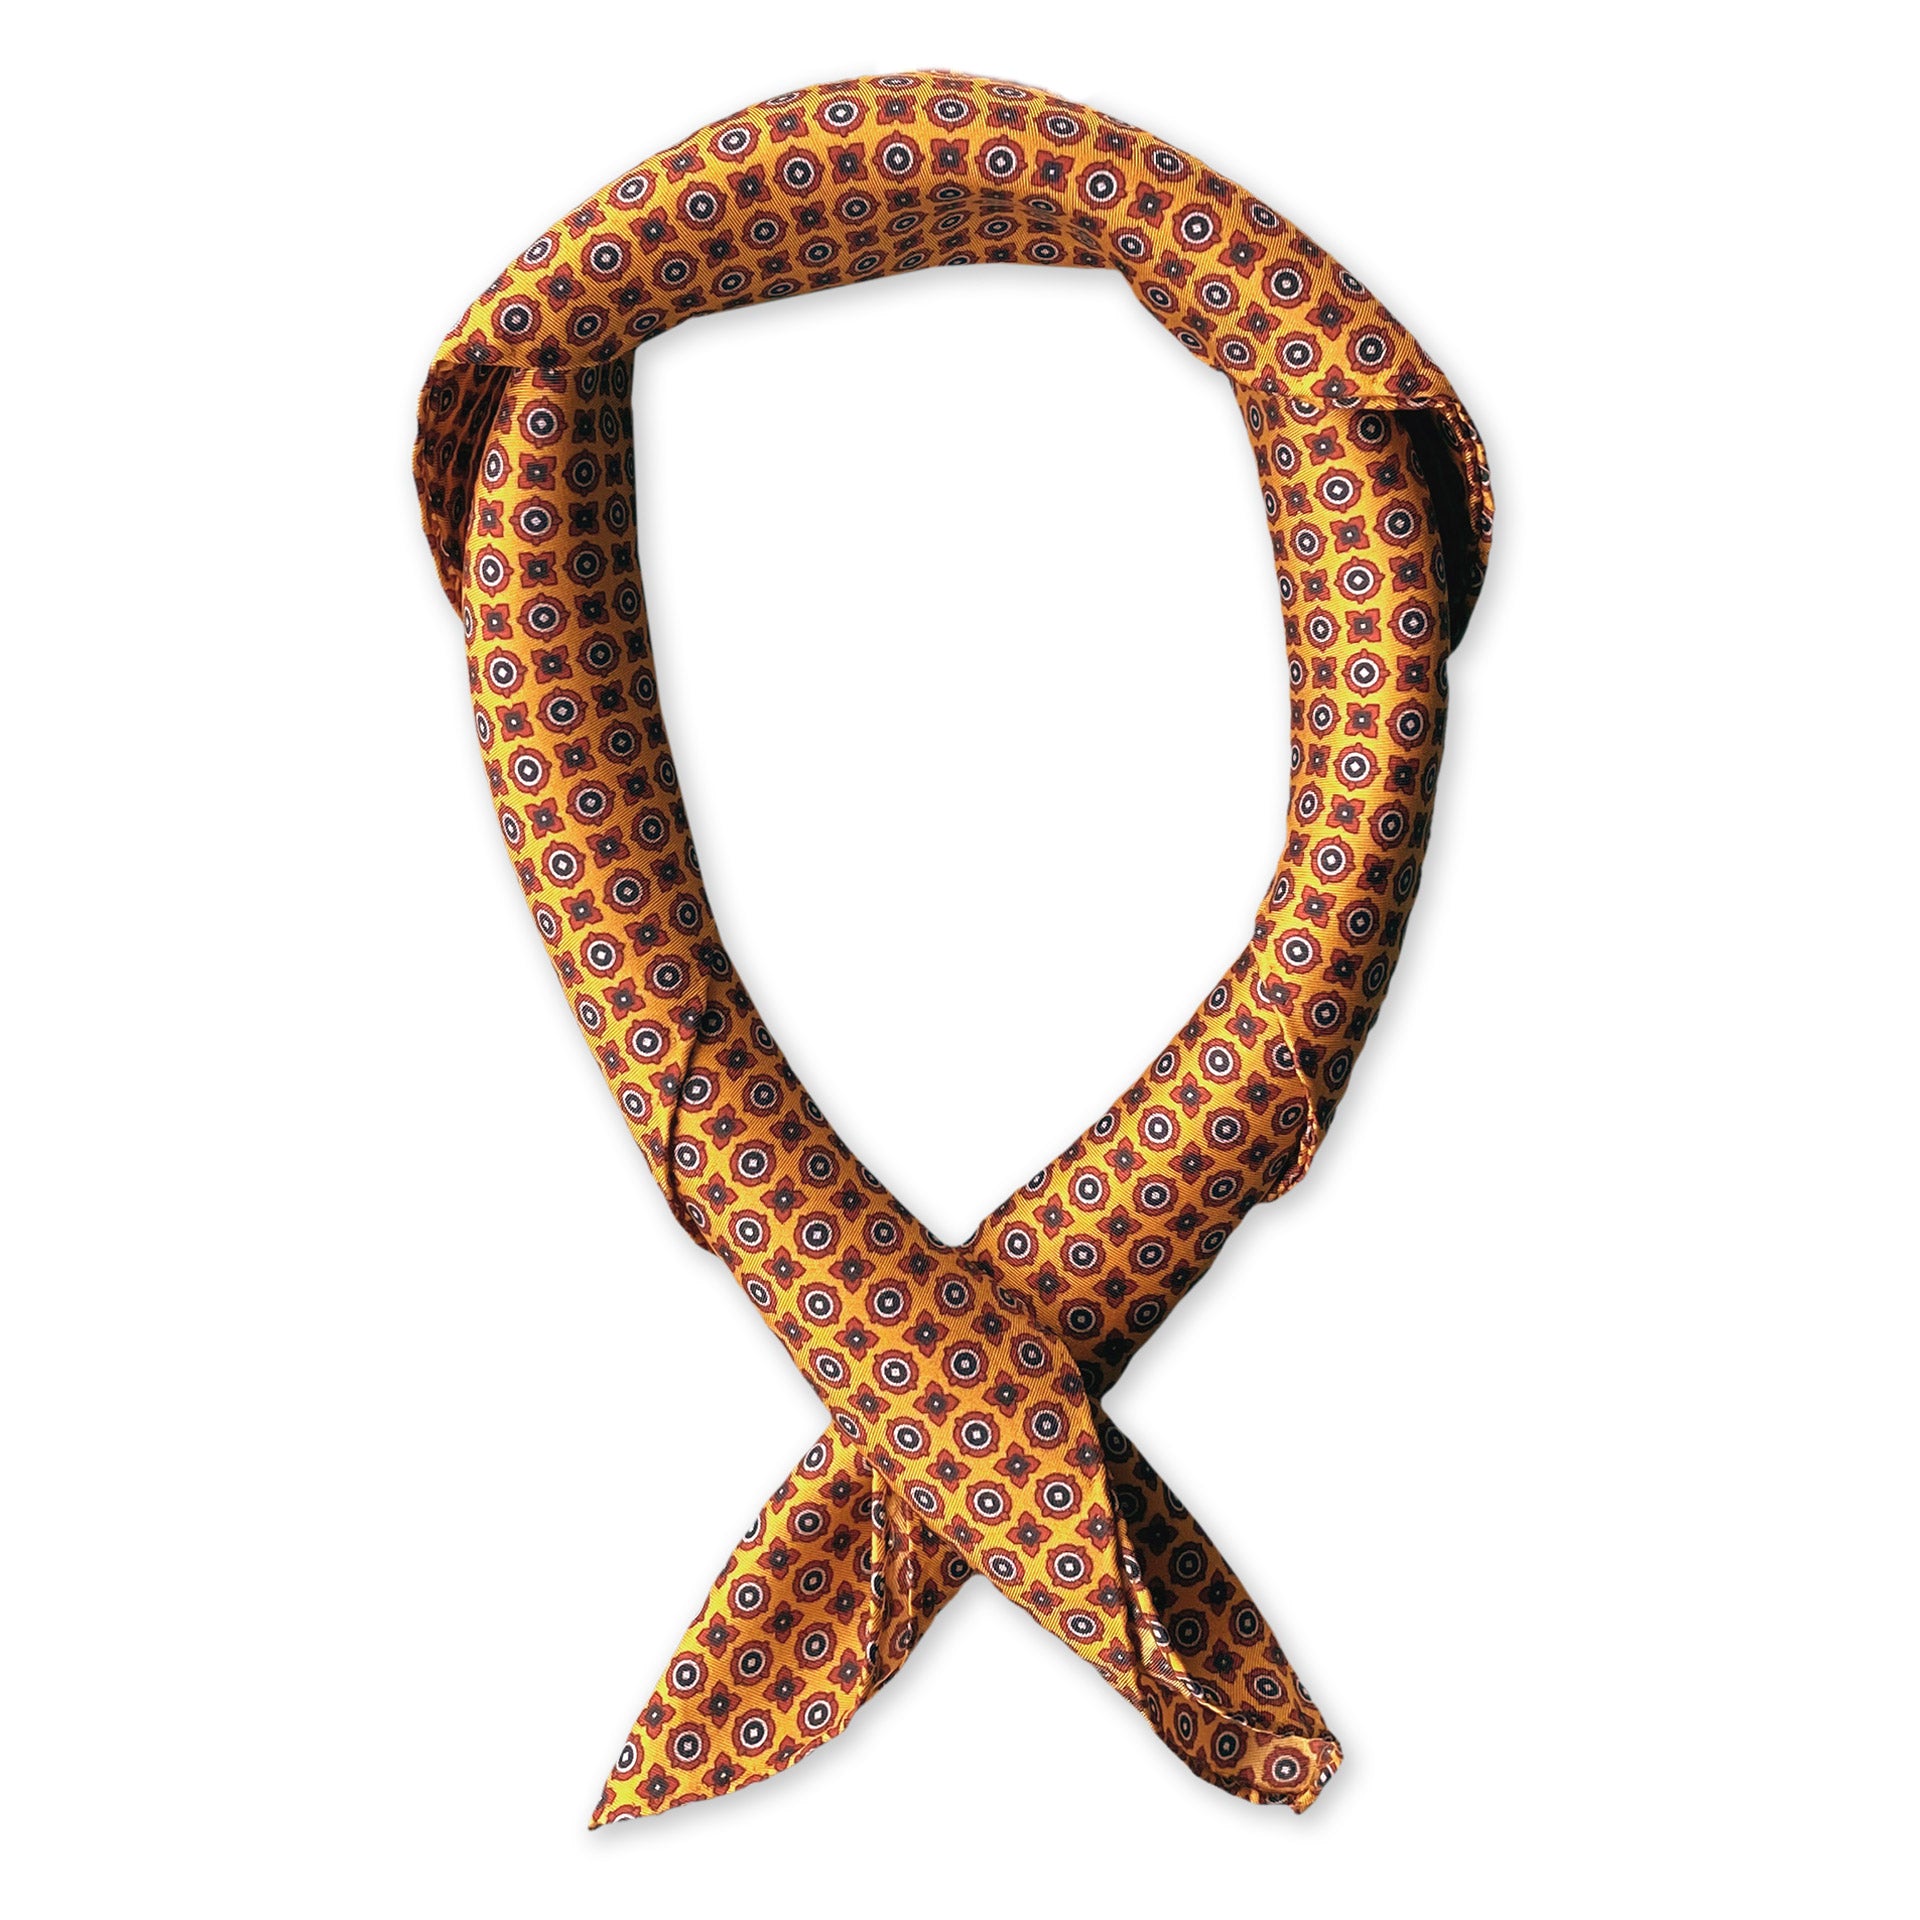 Square scarf rolled into a loop, showing the fabric sheen of the golden design and intricate patterns.